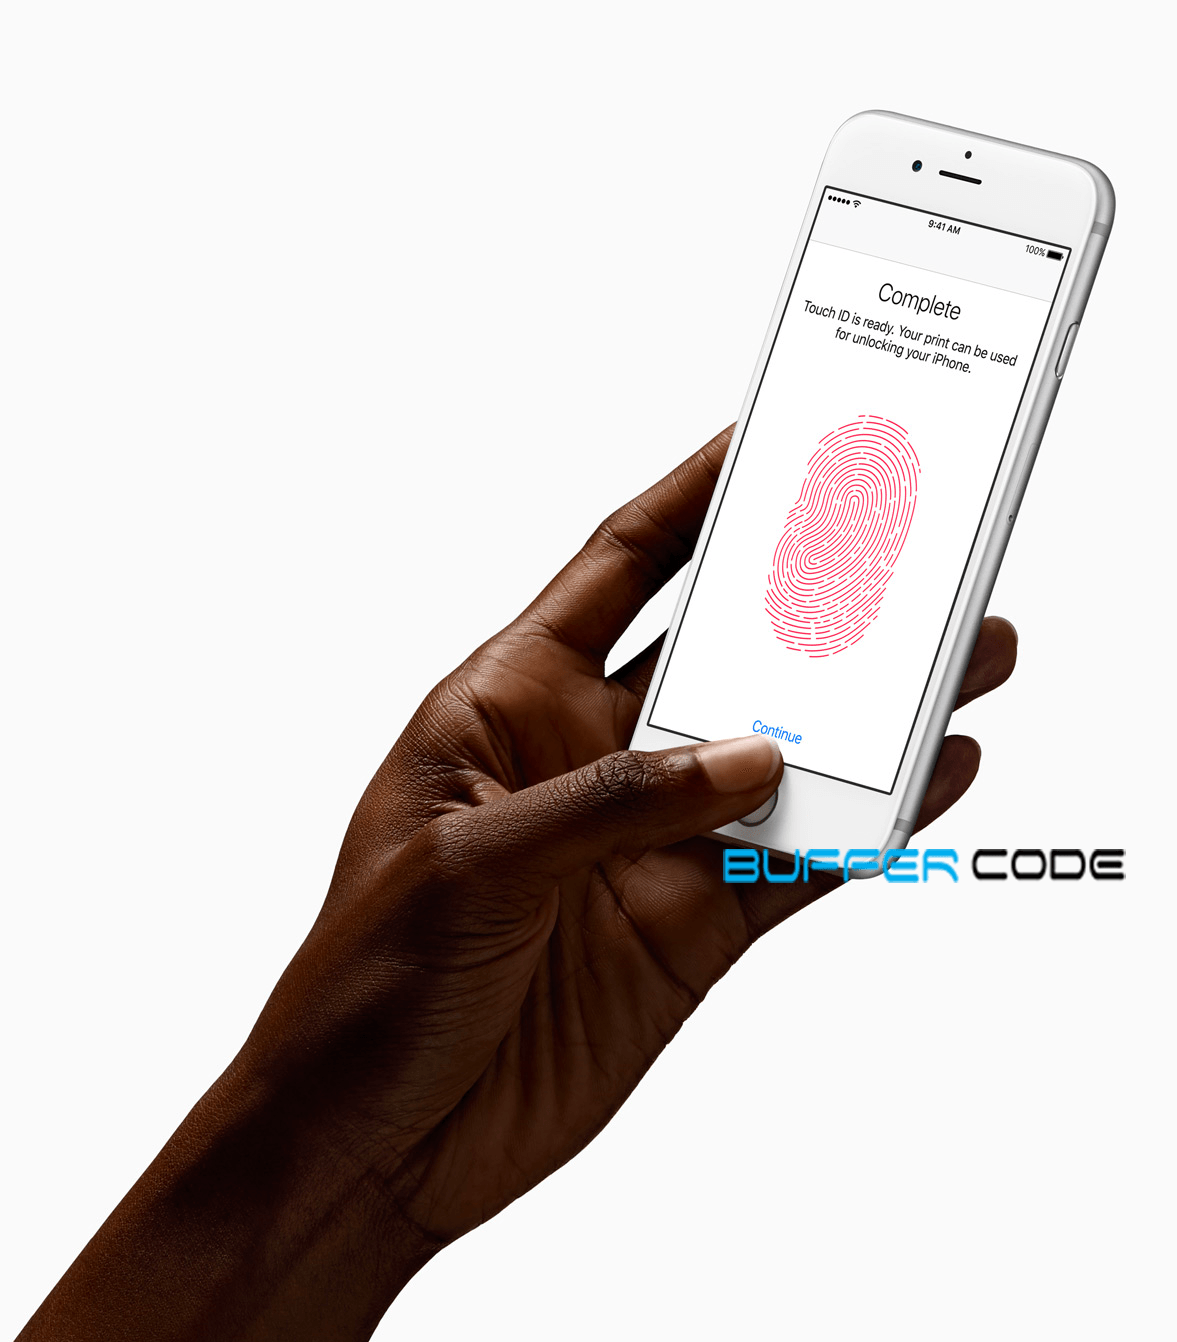 iPhone 6s touchID